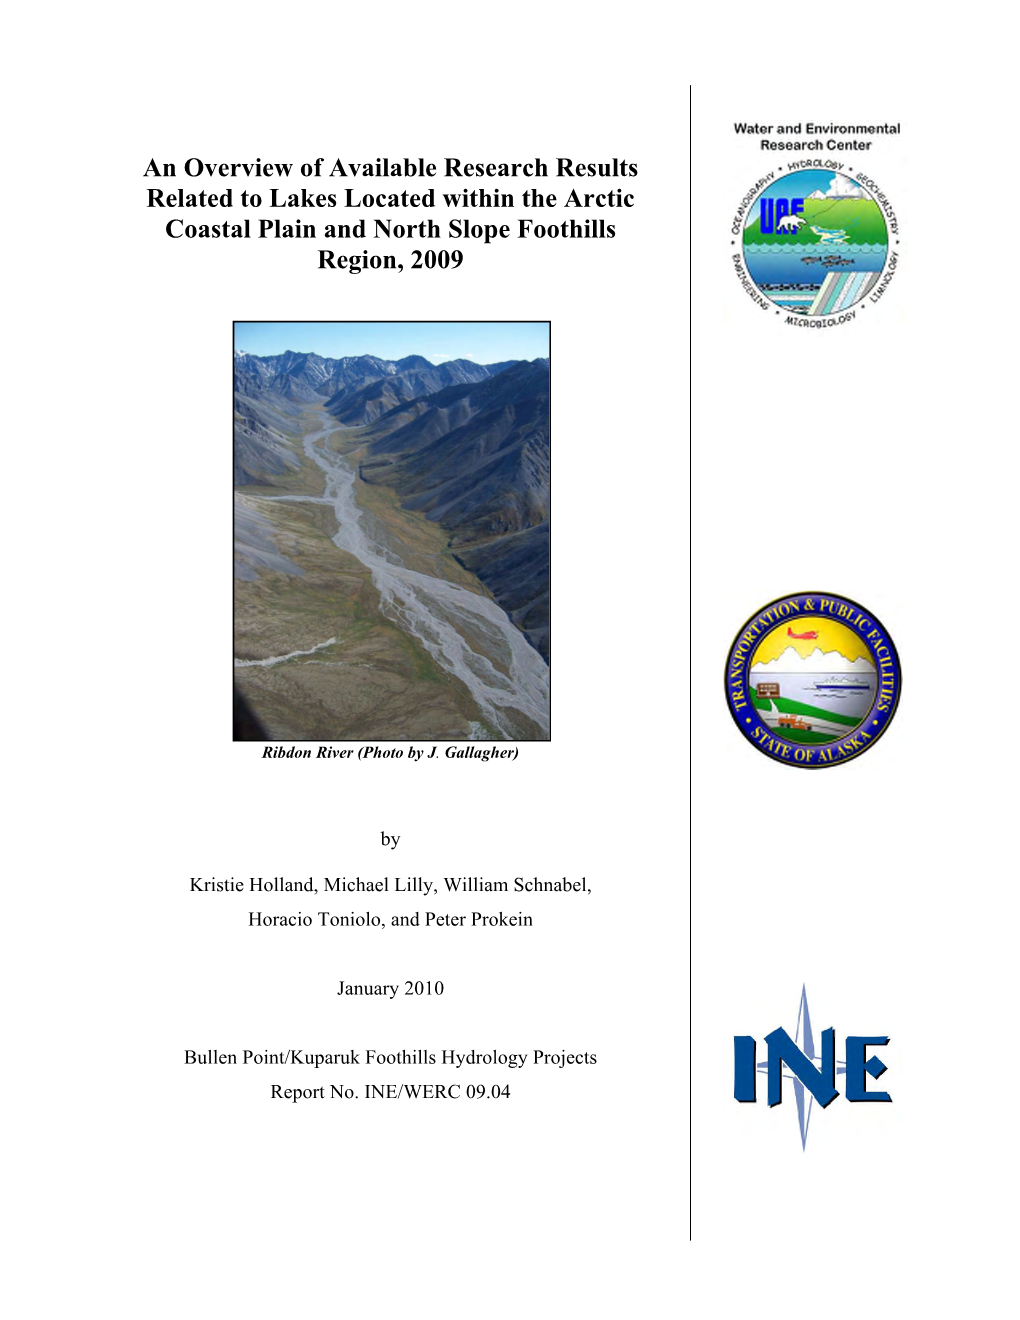 Lake Survey Data for the Coastal Plain from Prudhoe Bay to Bullen